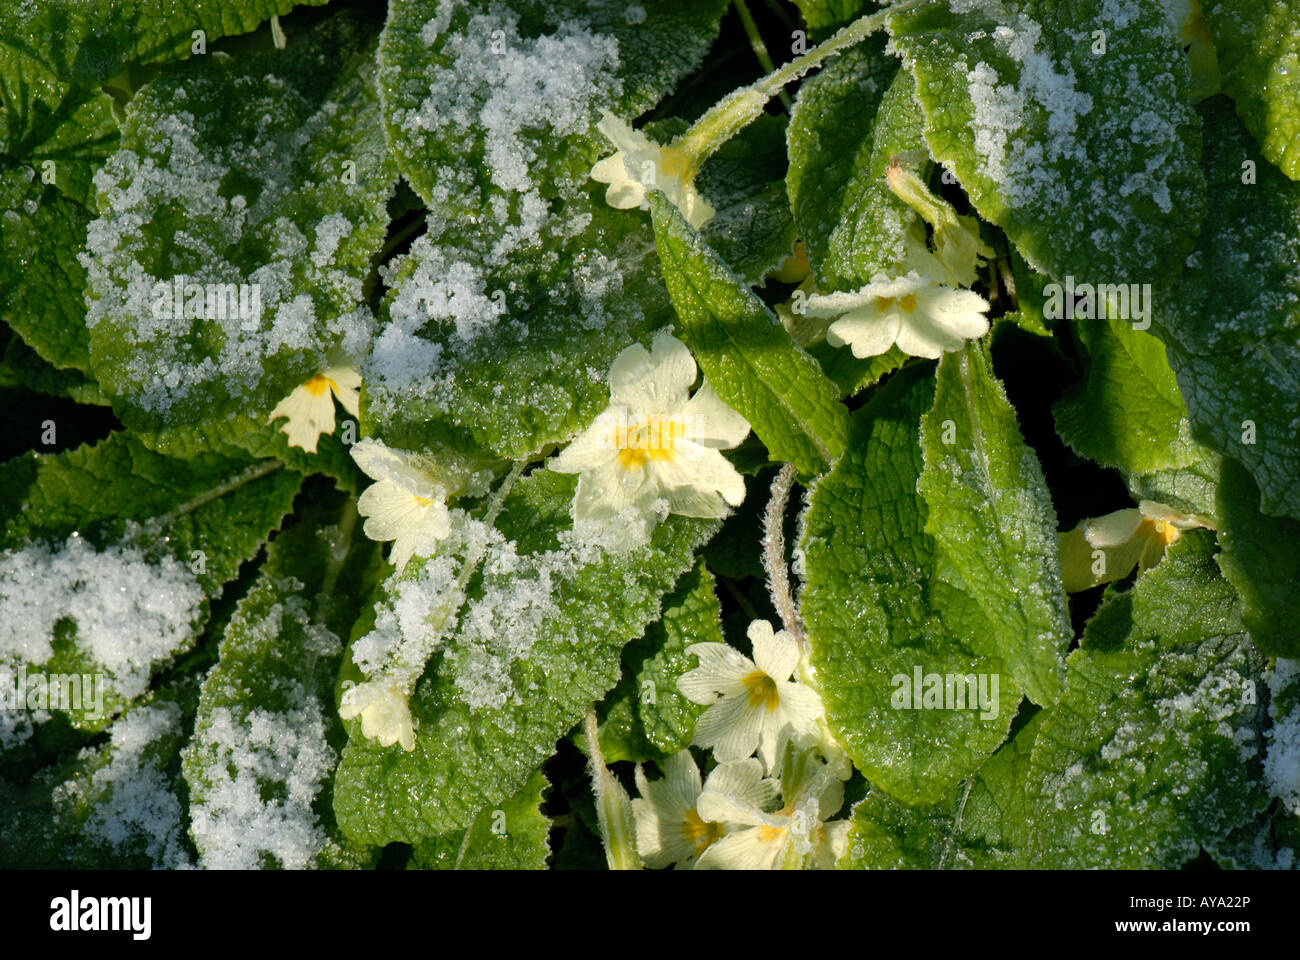 Primrose Primula vulgaris with a light covering of snow in deciduous woodland in spring Stock Photo